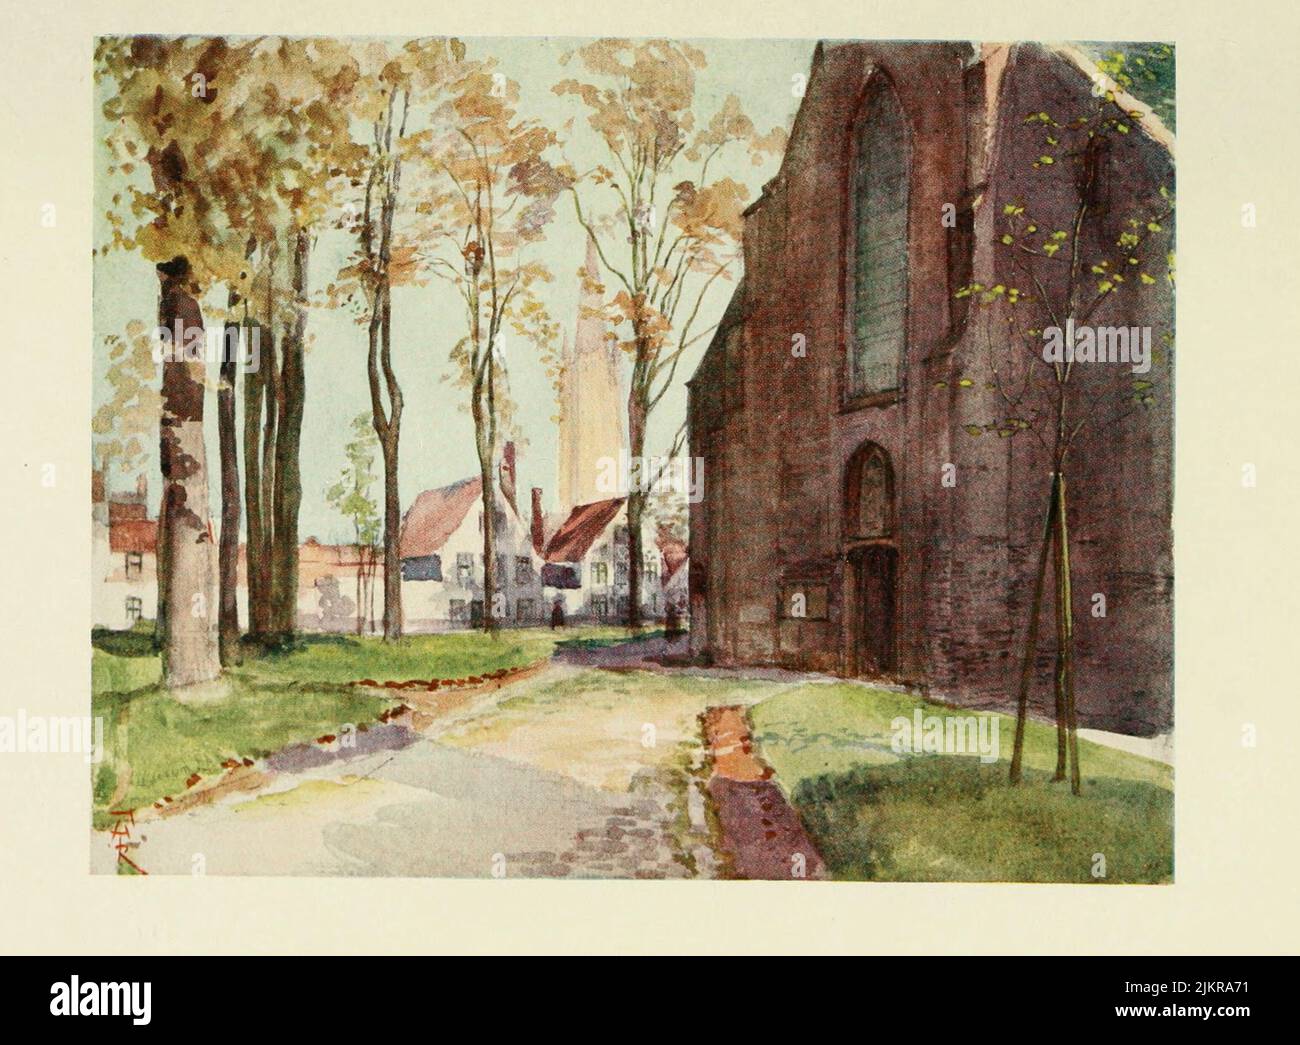 Bruges : The Béguinage Painted by Amedee Forestier, from the book '  Bruges and West Flanders ' by George William Thomson Omond, Publication date 1906 Publisher London : A. & C. Black Sir Amédée Forestier (Paris 1854 – 18 November 1930 London) was an Anglo-French artist and illustrator who specialised in historical and prehistoric scenes, and landscapes. Stock Photo